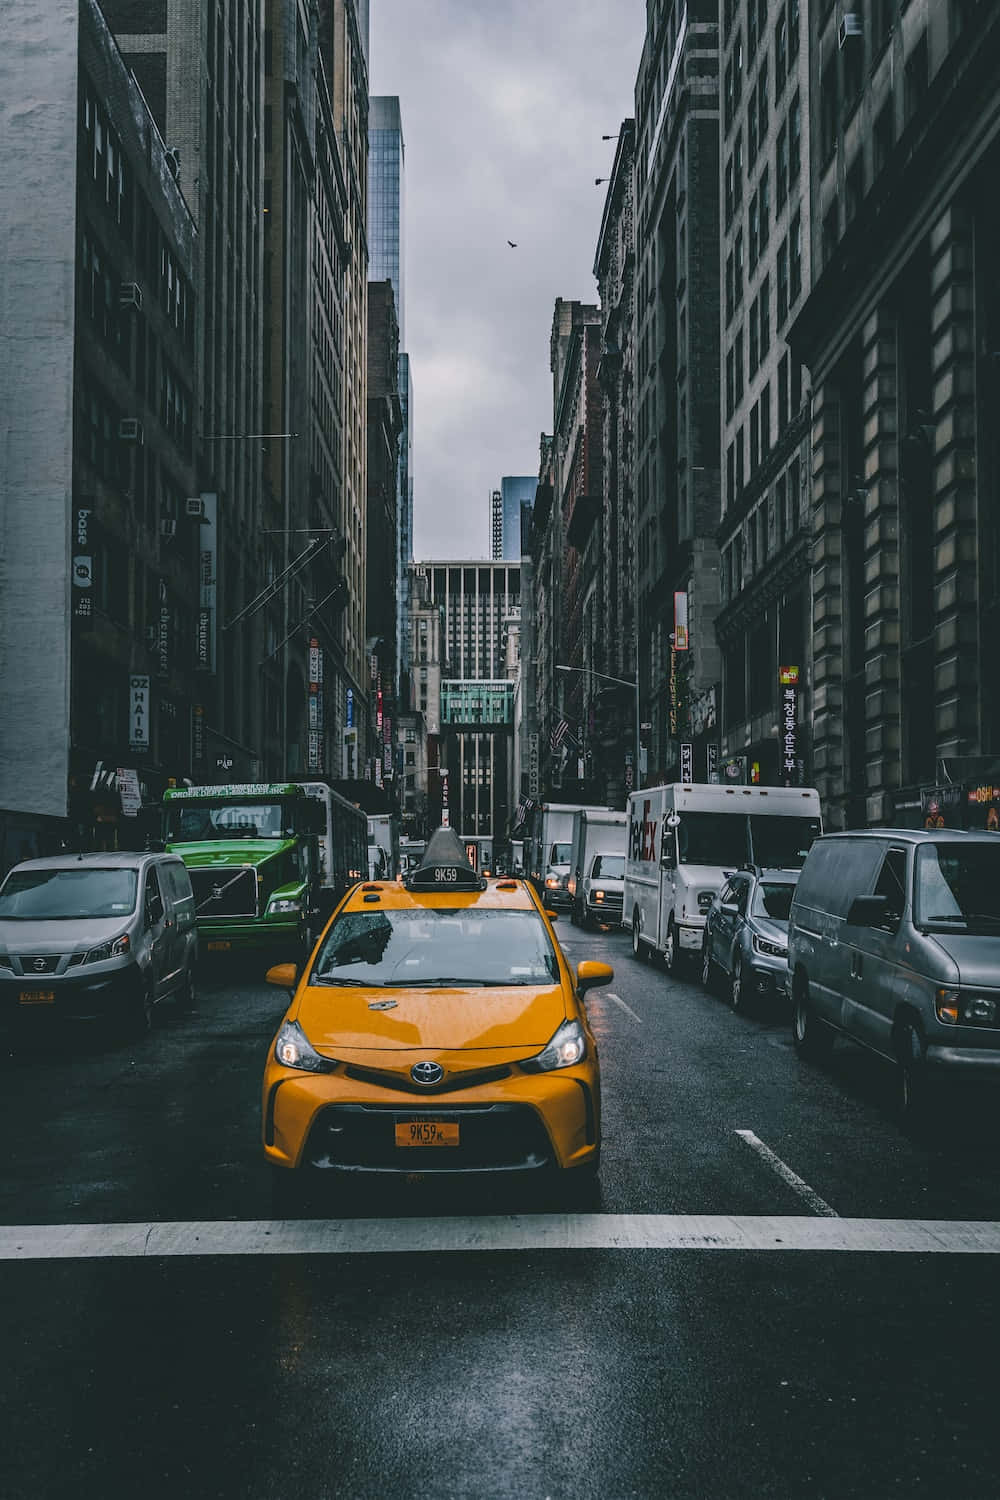 Vintage Yellow Cab Cruising Through the City Streets Wallpaper